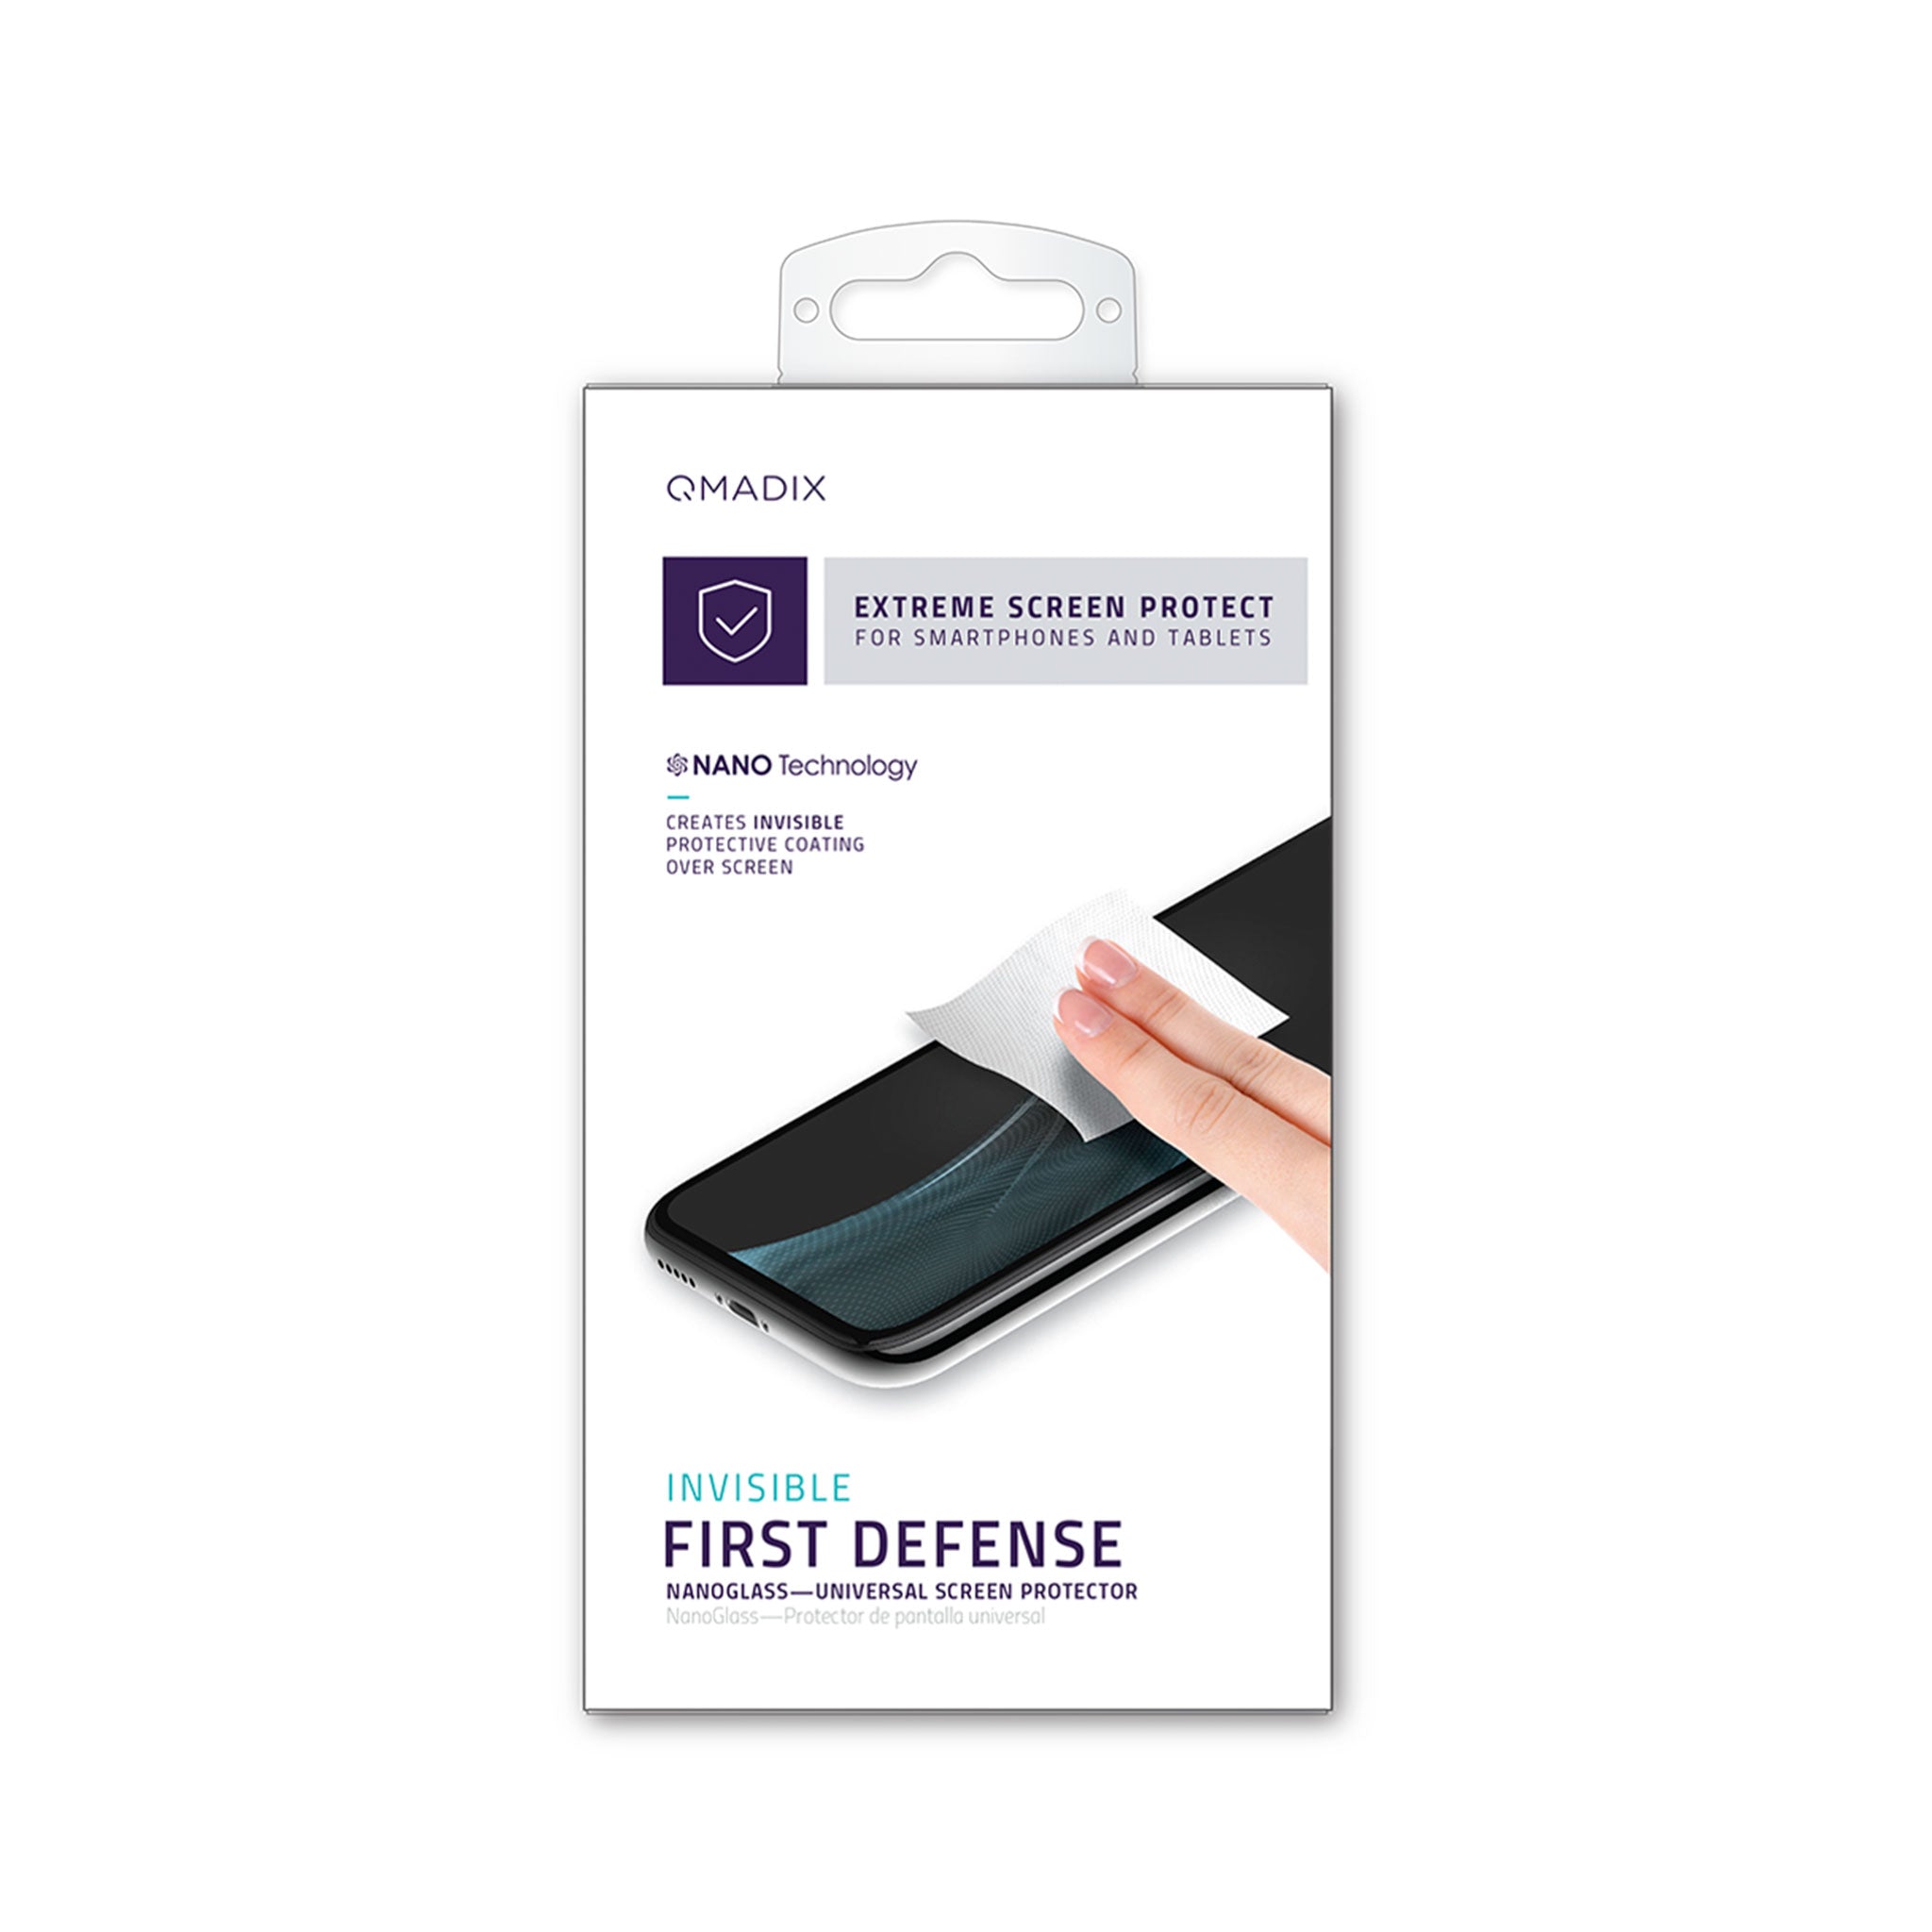 Qmadix - Invisible First-defense Nanoglass Universal Screen Protection - Clear